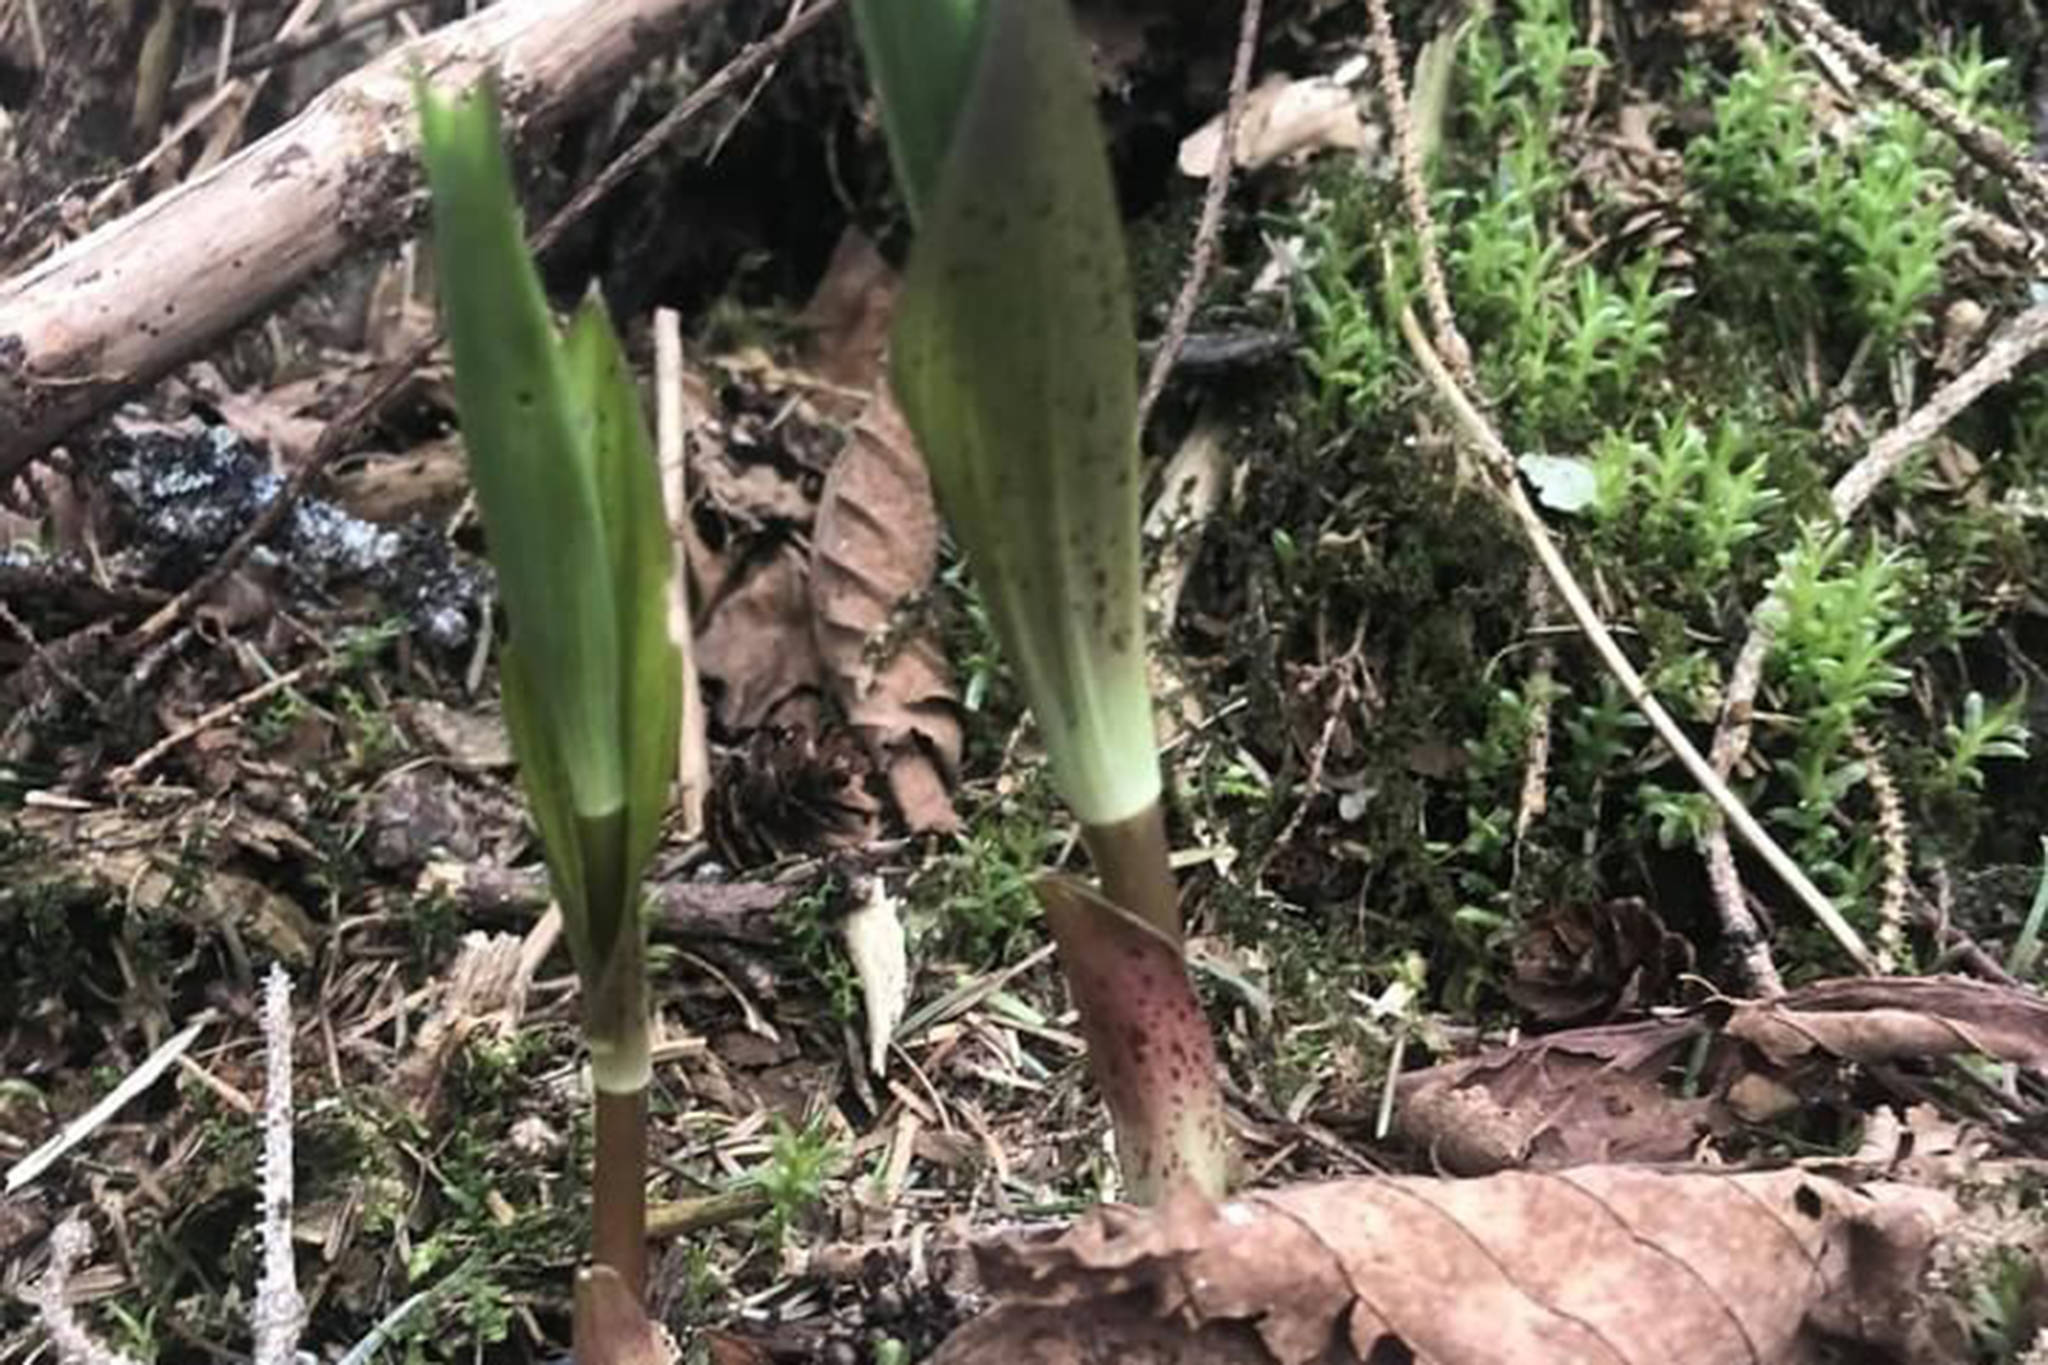 The first rule of wild harvesting is, “Don’t harvest what you don’t know.” It’s also the second rule. That’s because for a novice harvester, it can be easy to confuse the potentially deadly false hellebore with watermelon berry shoots. (Courtesy Photo / Vivian Mork Yéilk’)